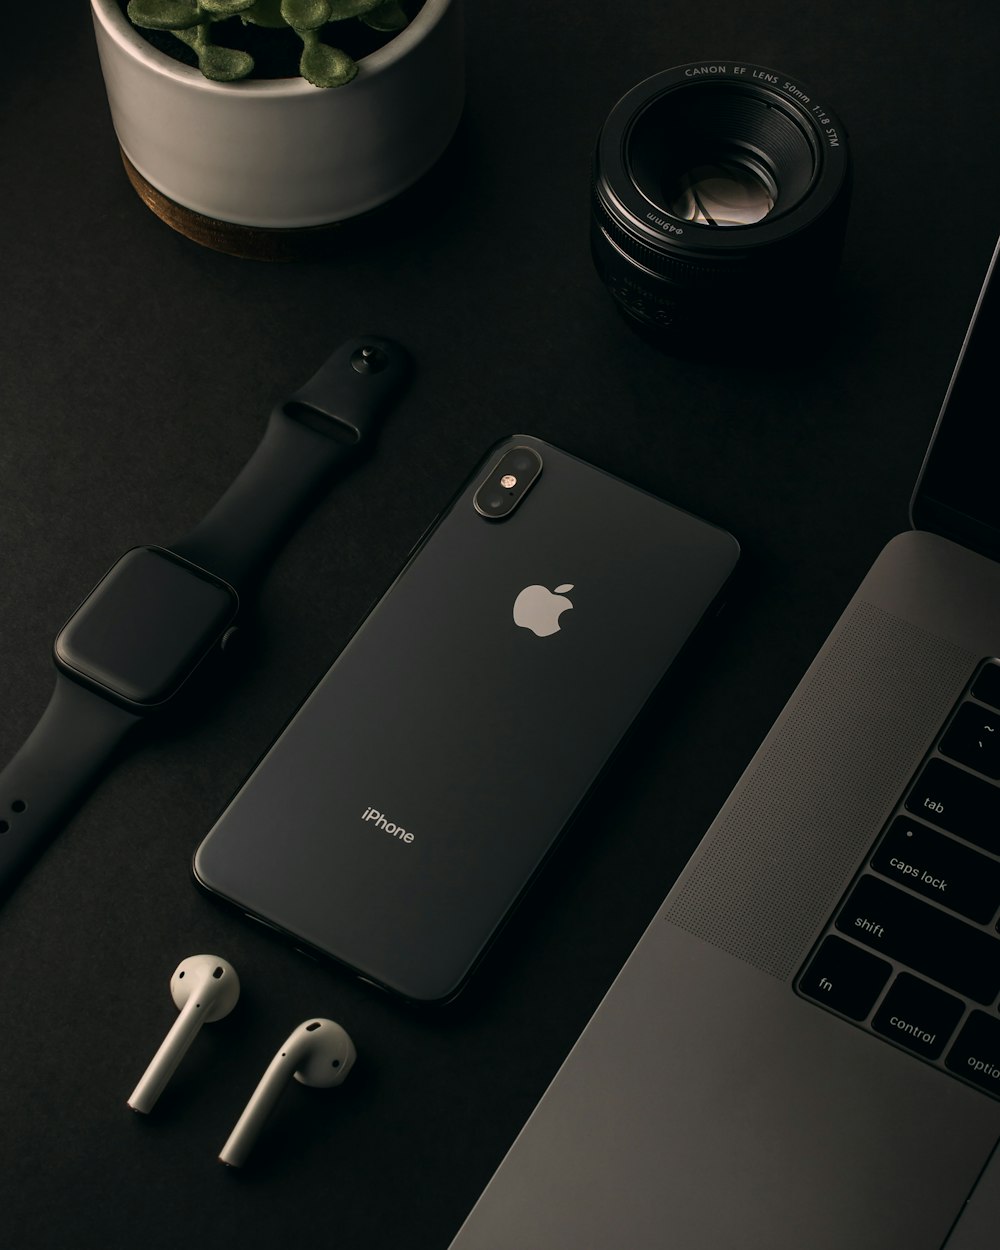 space gray iPhone X and Apple watch